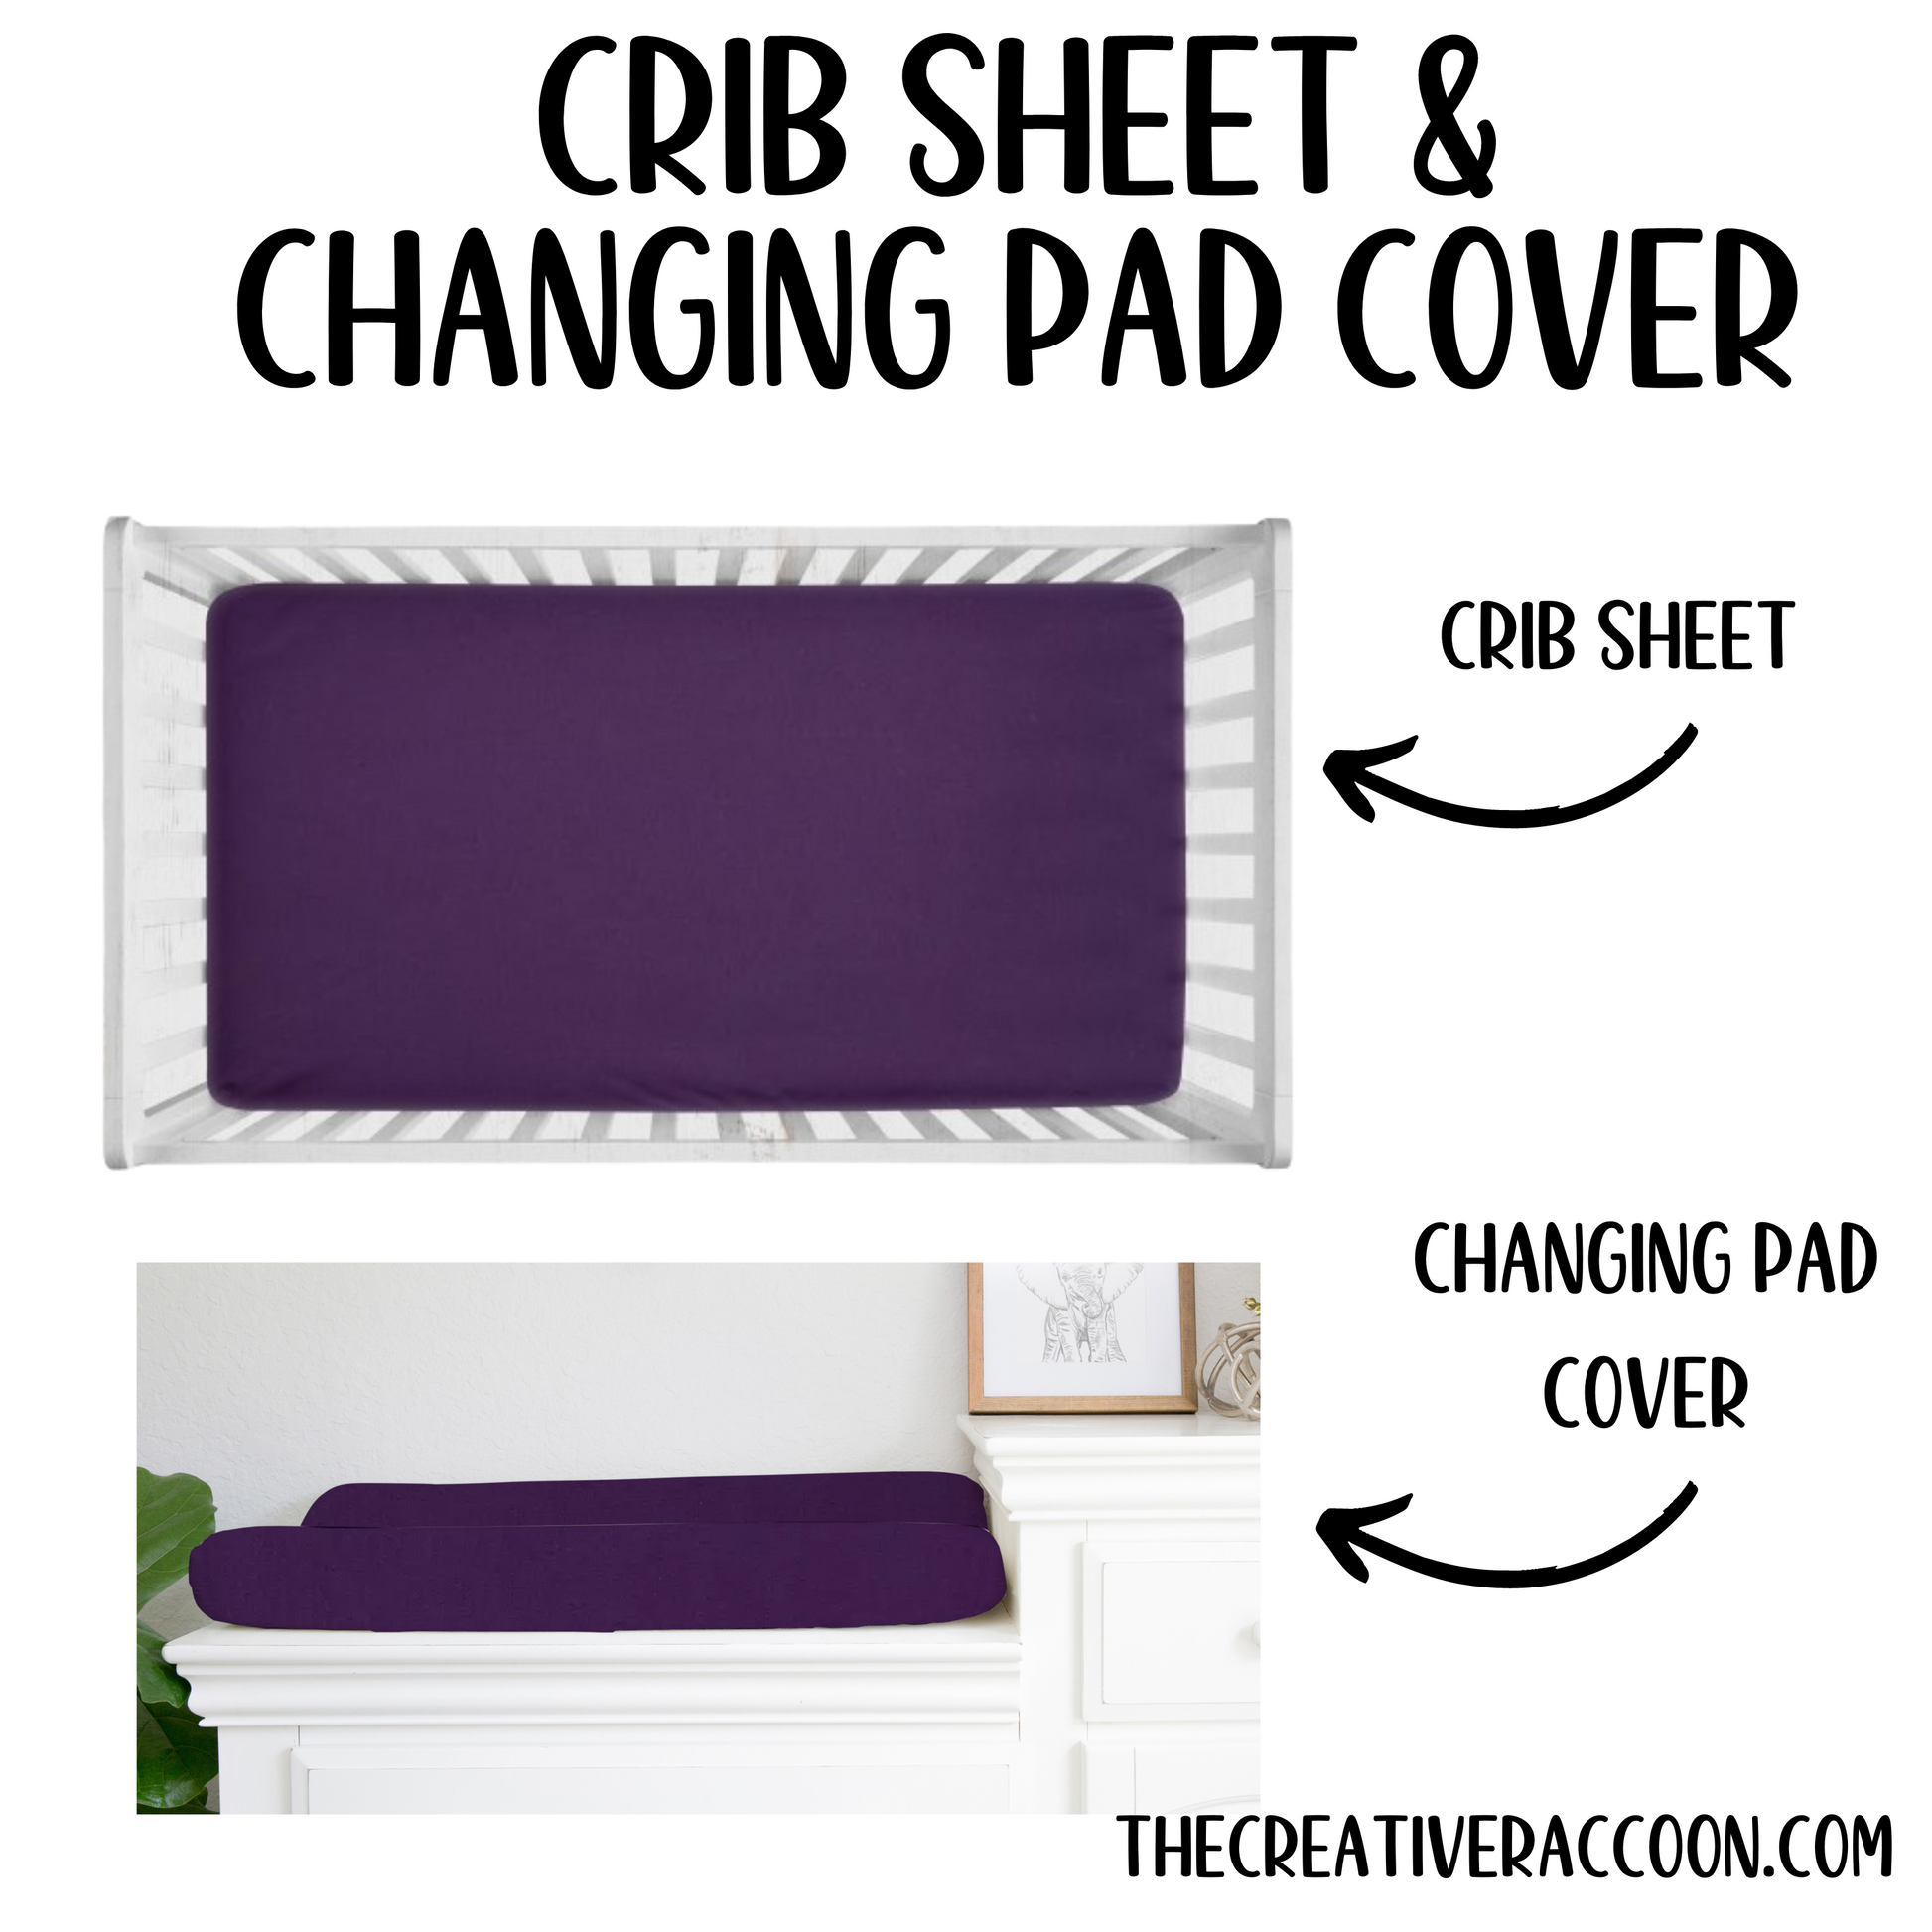 dark purple sheet & changing pad cover. Sheet available in standard crib size (28x52") & mini crib size (24x38")